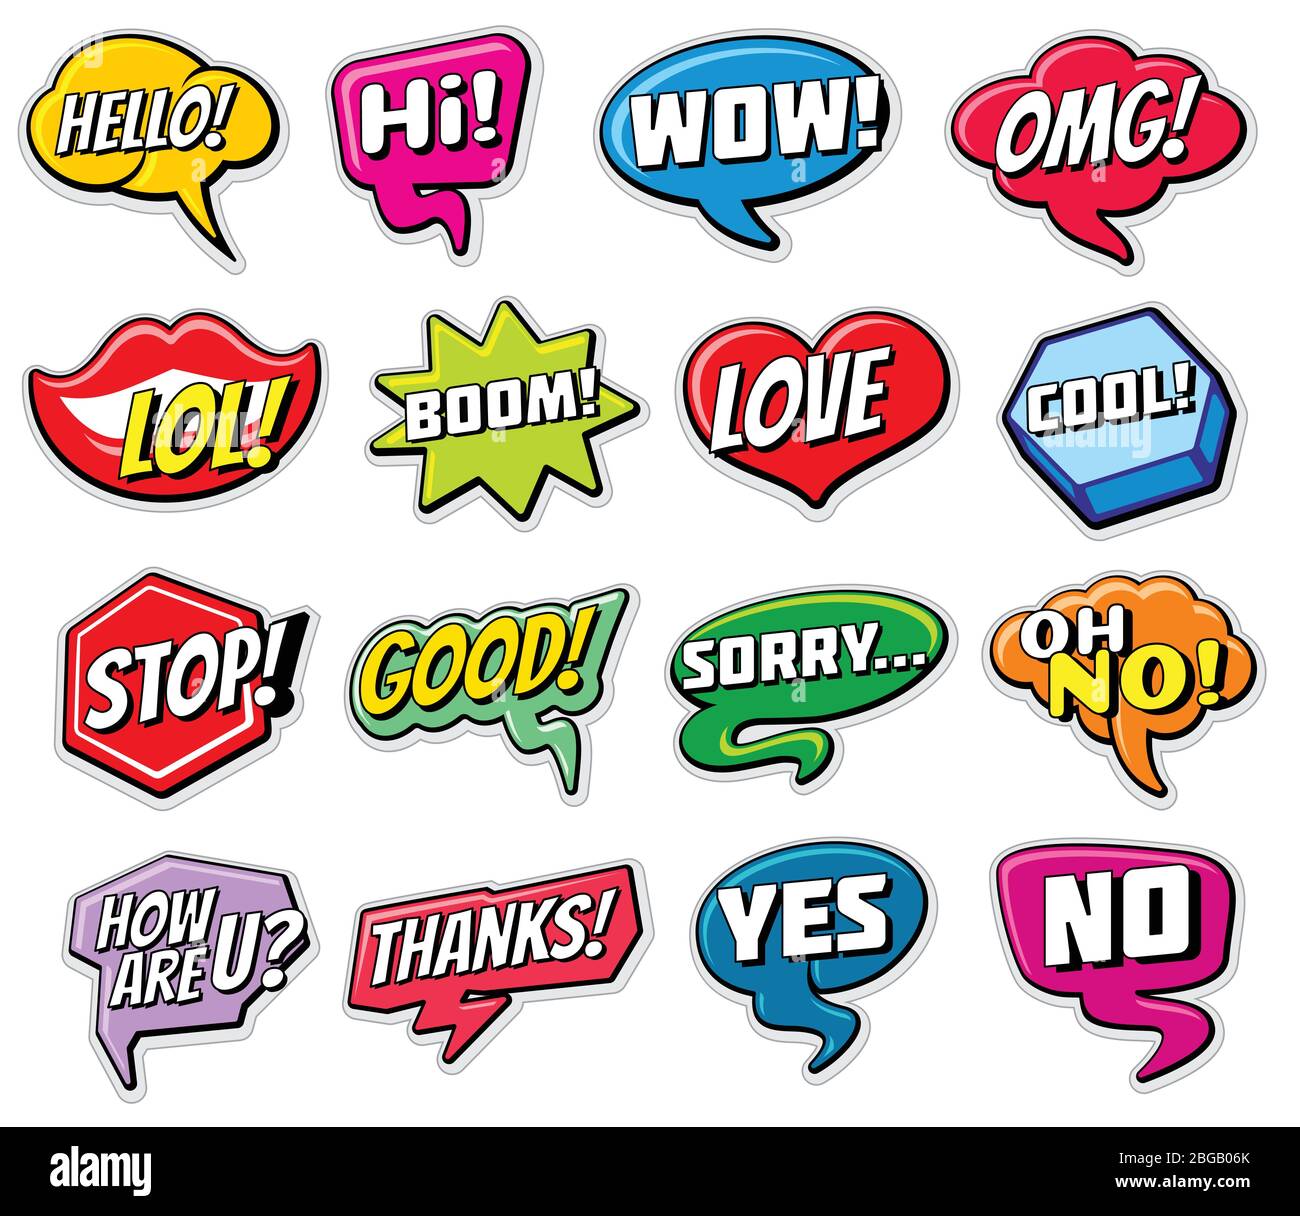 Web chat vector stickers templates. Internet words speech bubbles isolated. Illustration of bubble with word chat hello, love, yes and no Stock Vector